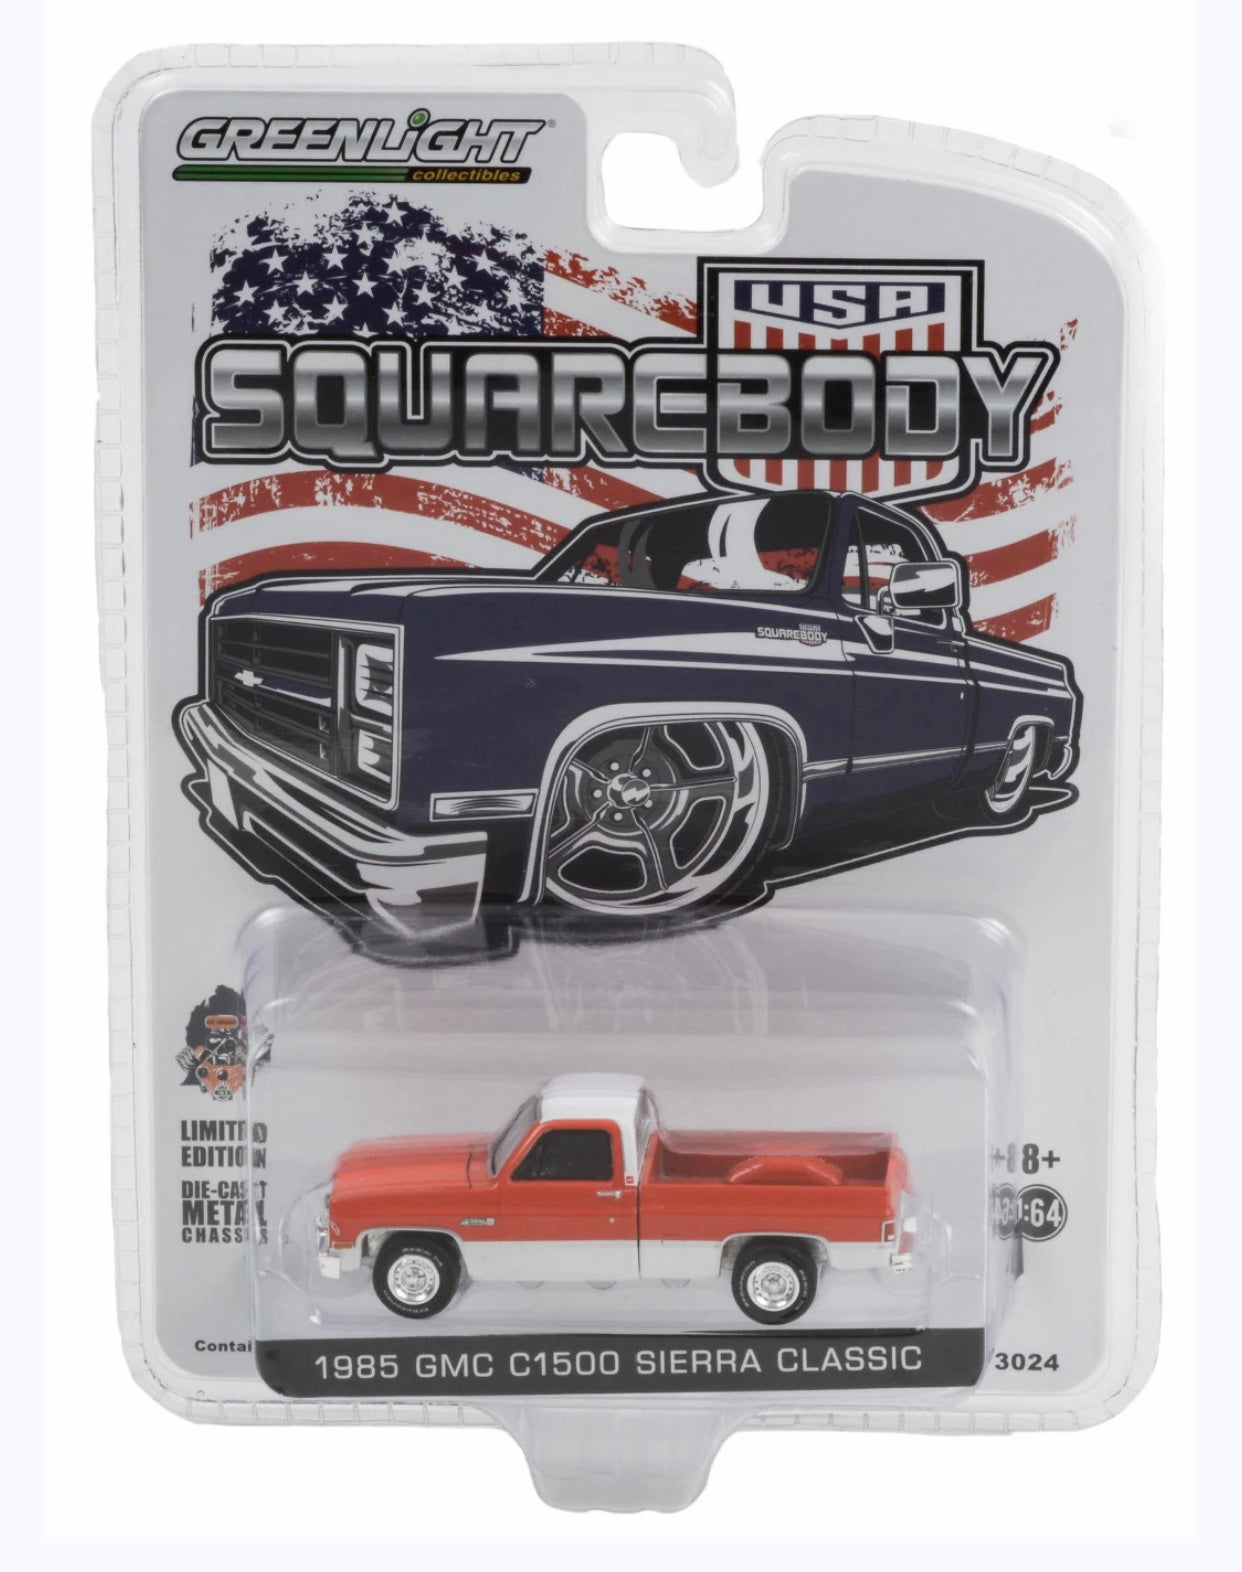 Greenlight Squarebody USA Exclusives 1985 GMC C1500 Sierra Classic Red White 1:64